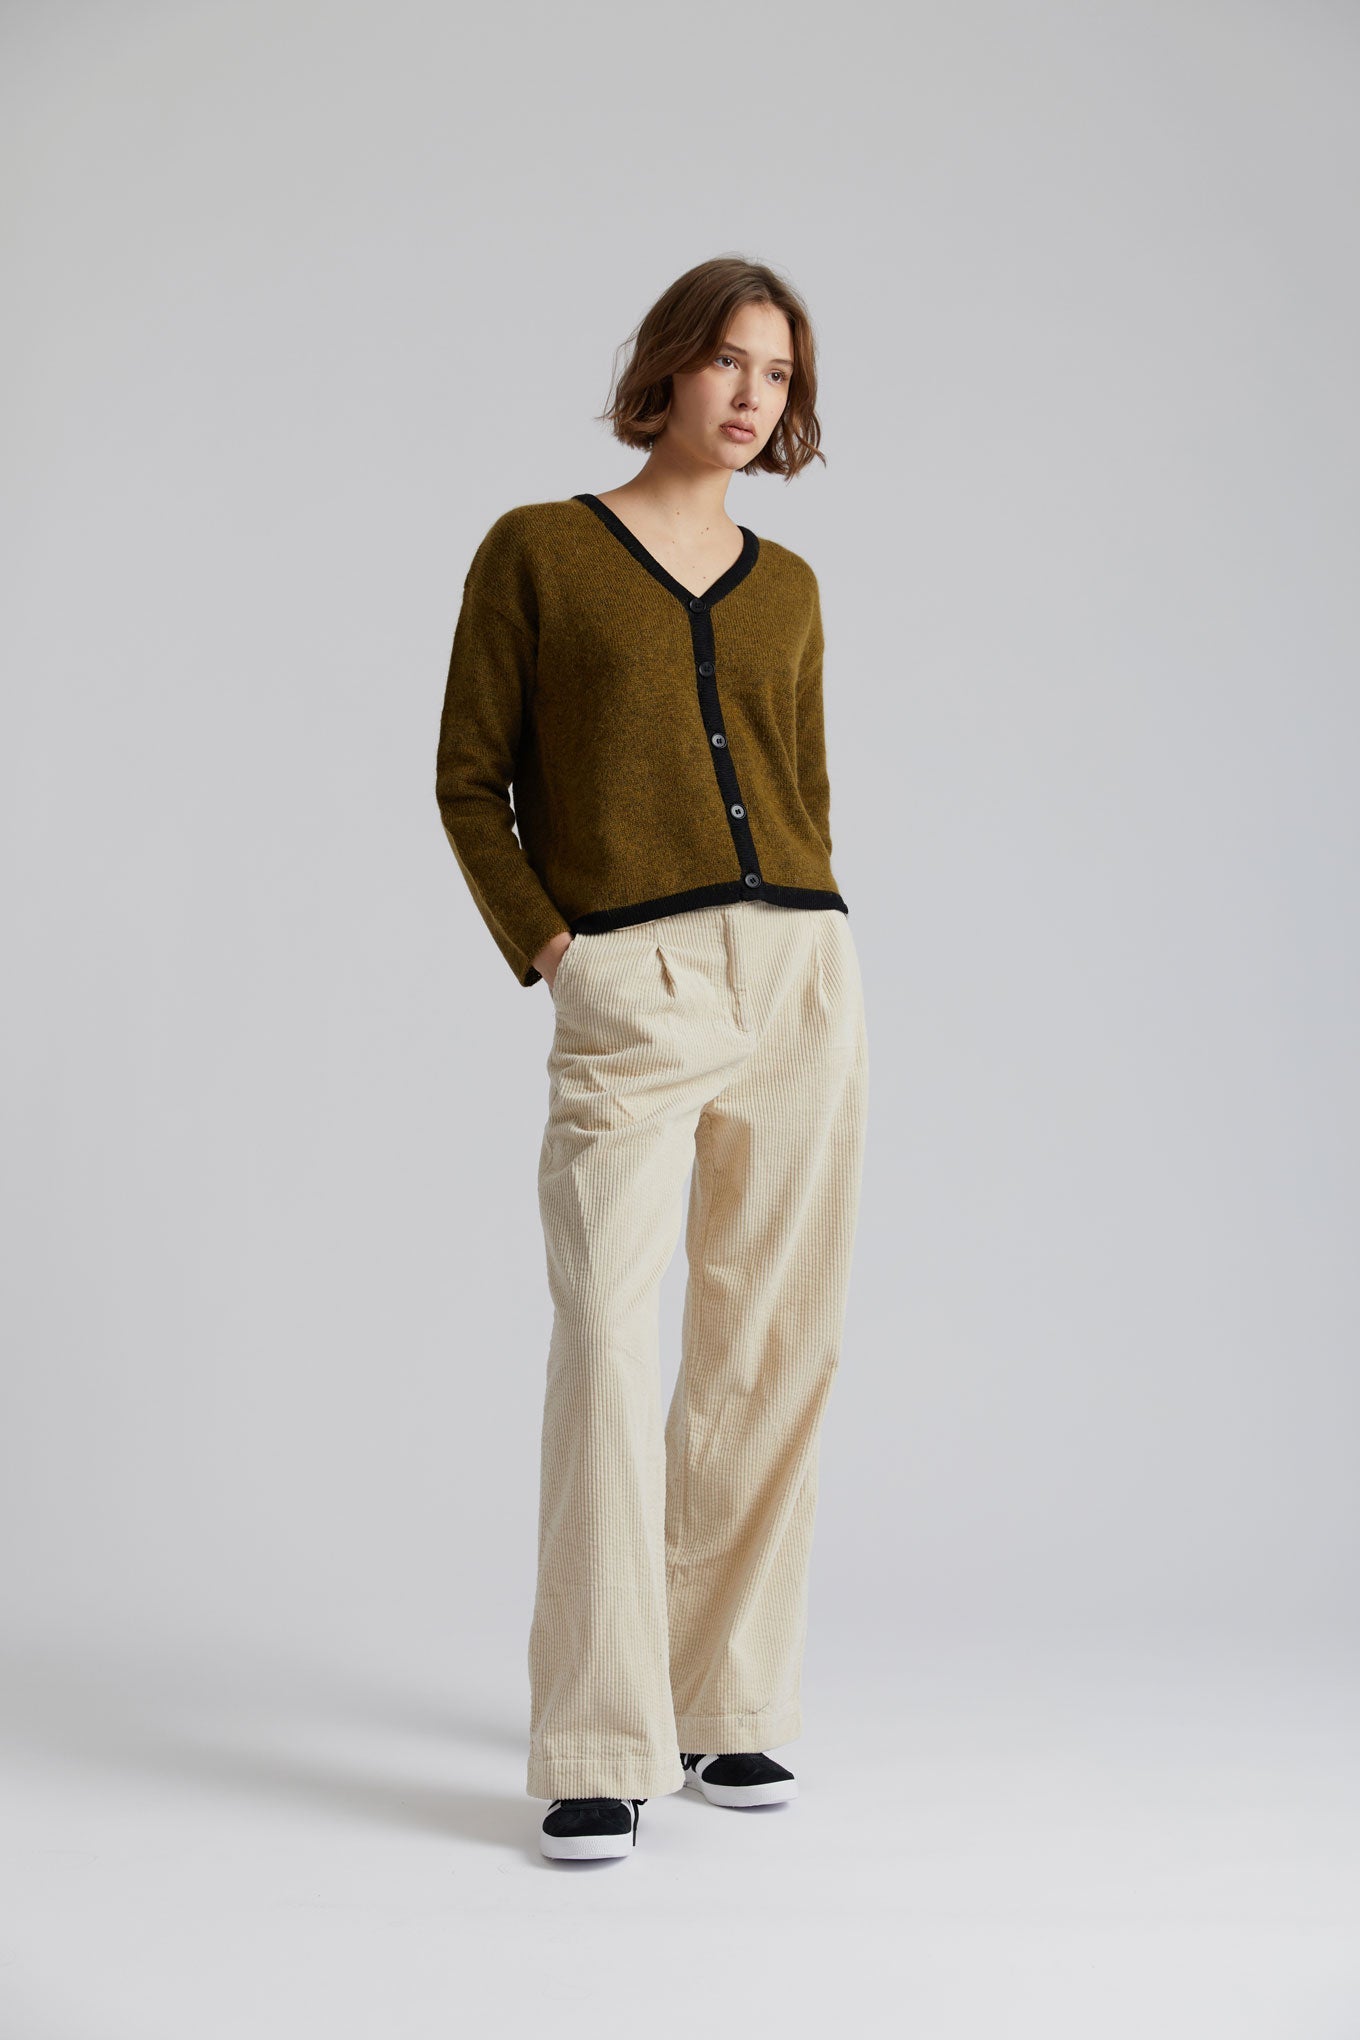 Light brown, wide corduroy trousers TIGER made of organic cotton by Komodo